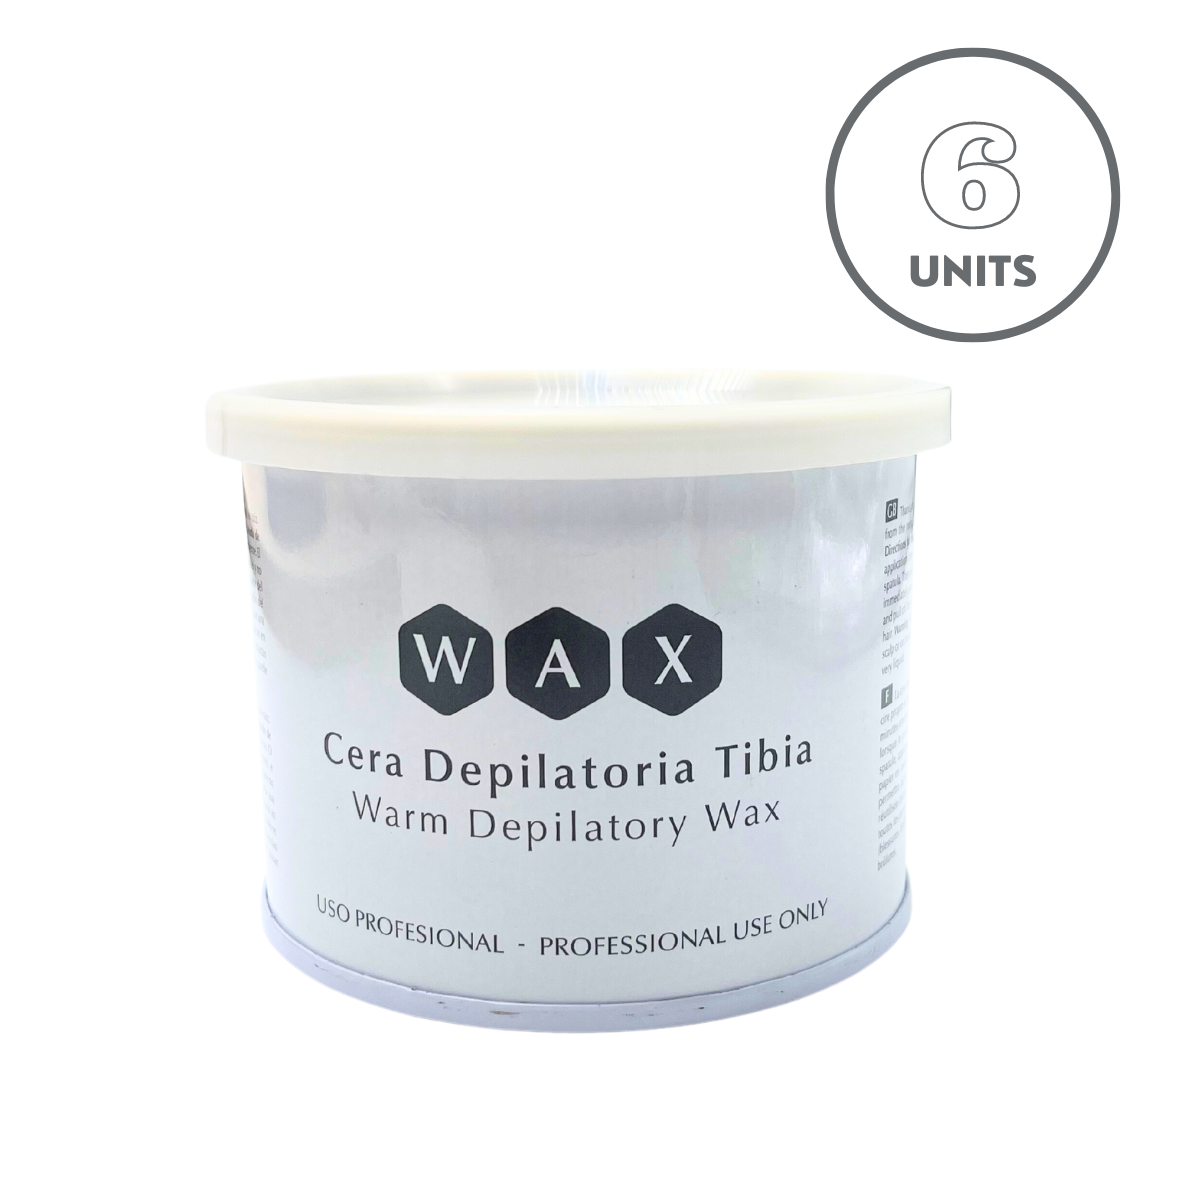 Depilcompany Soft Wax Natural Can - 14 oz. (6 Units Offer) - Buy professional cosmetics dedicated to hair removal